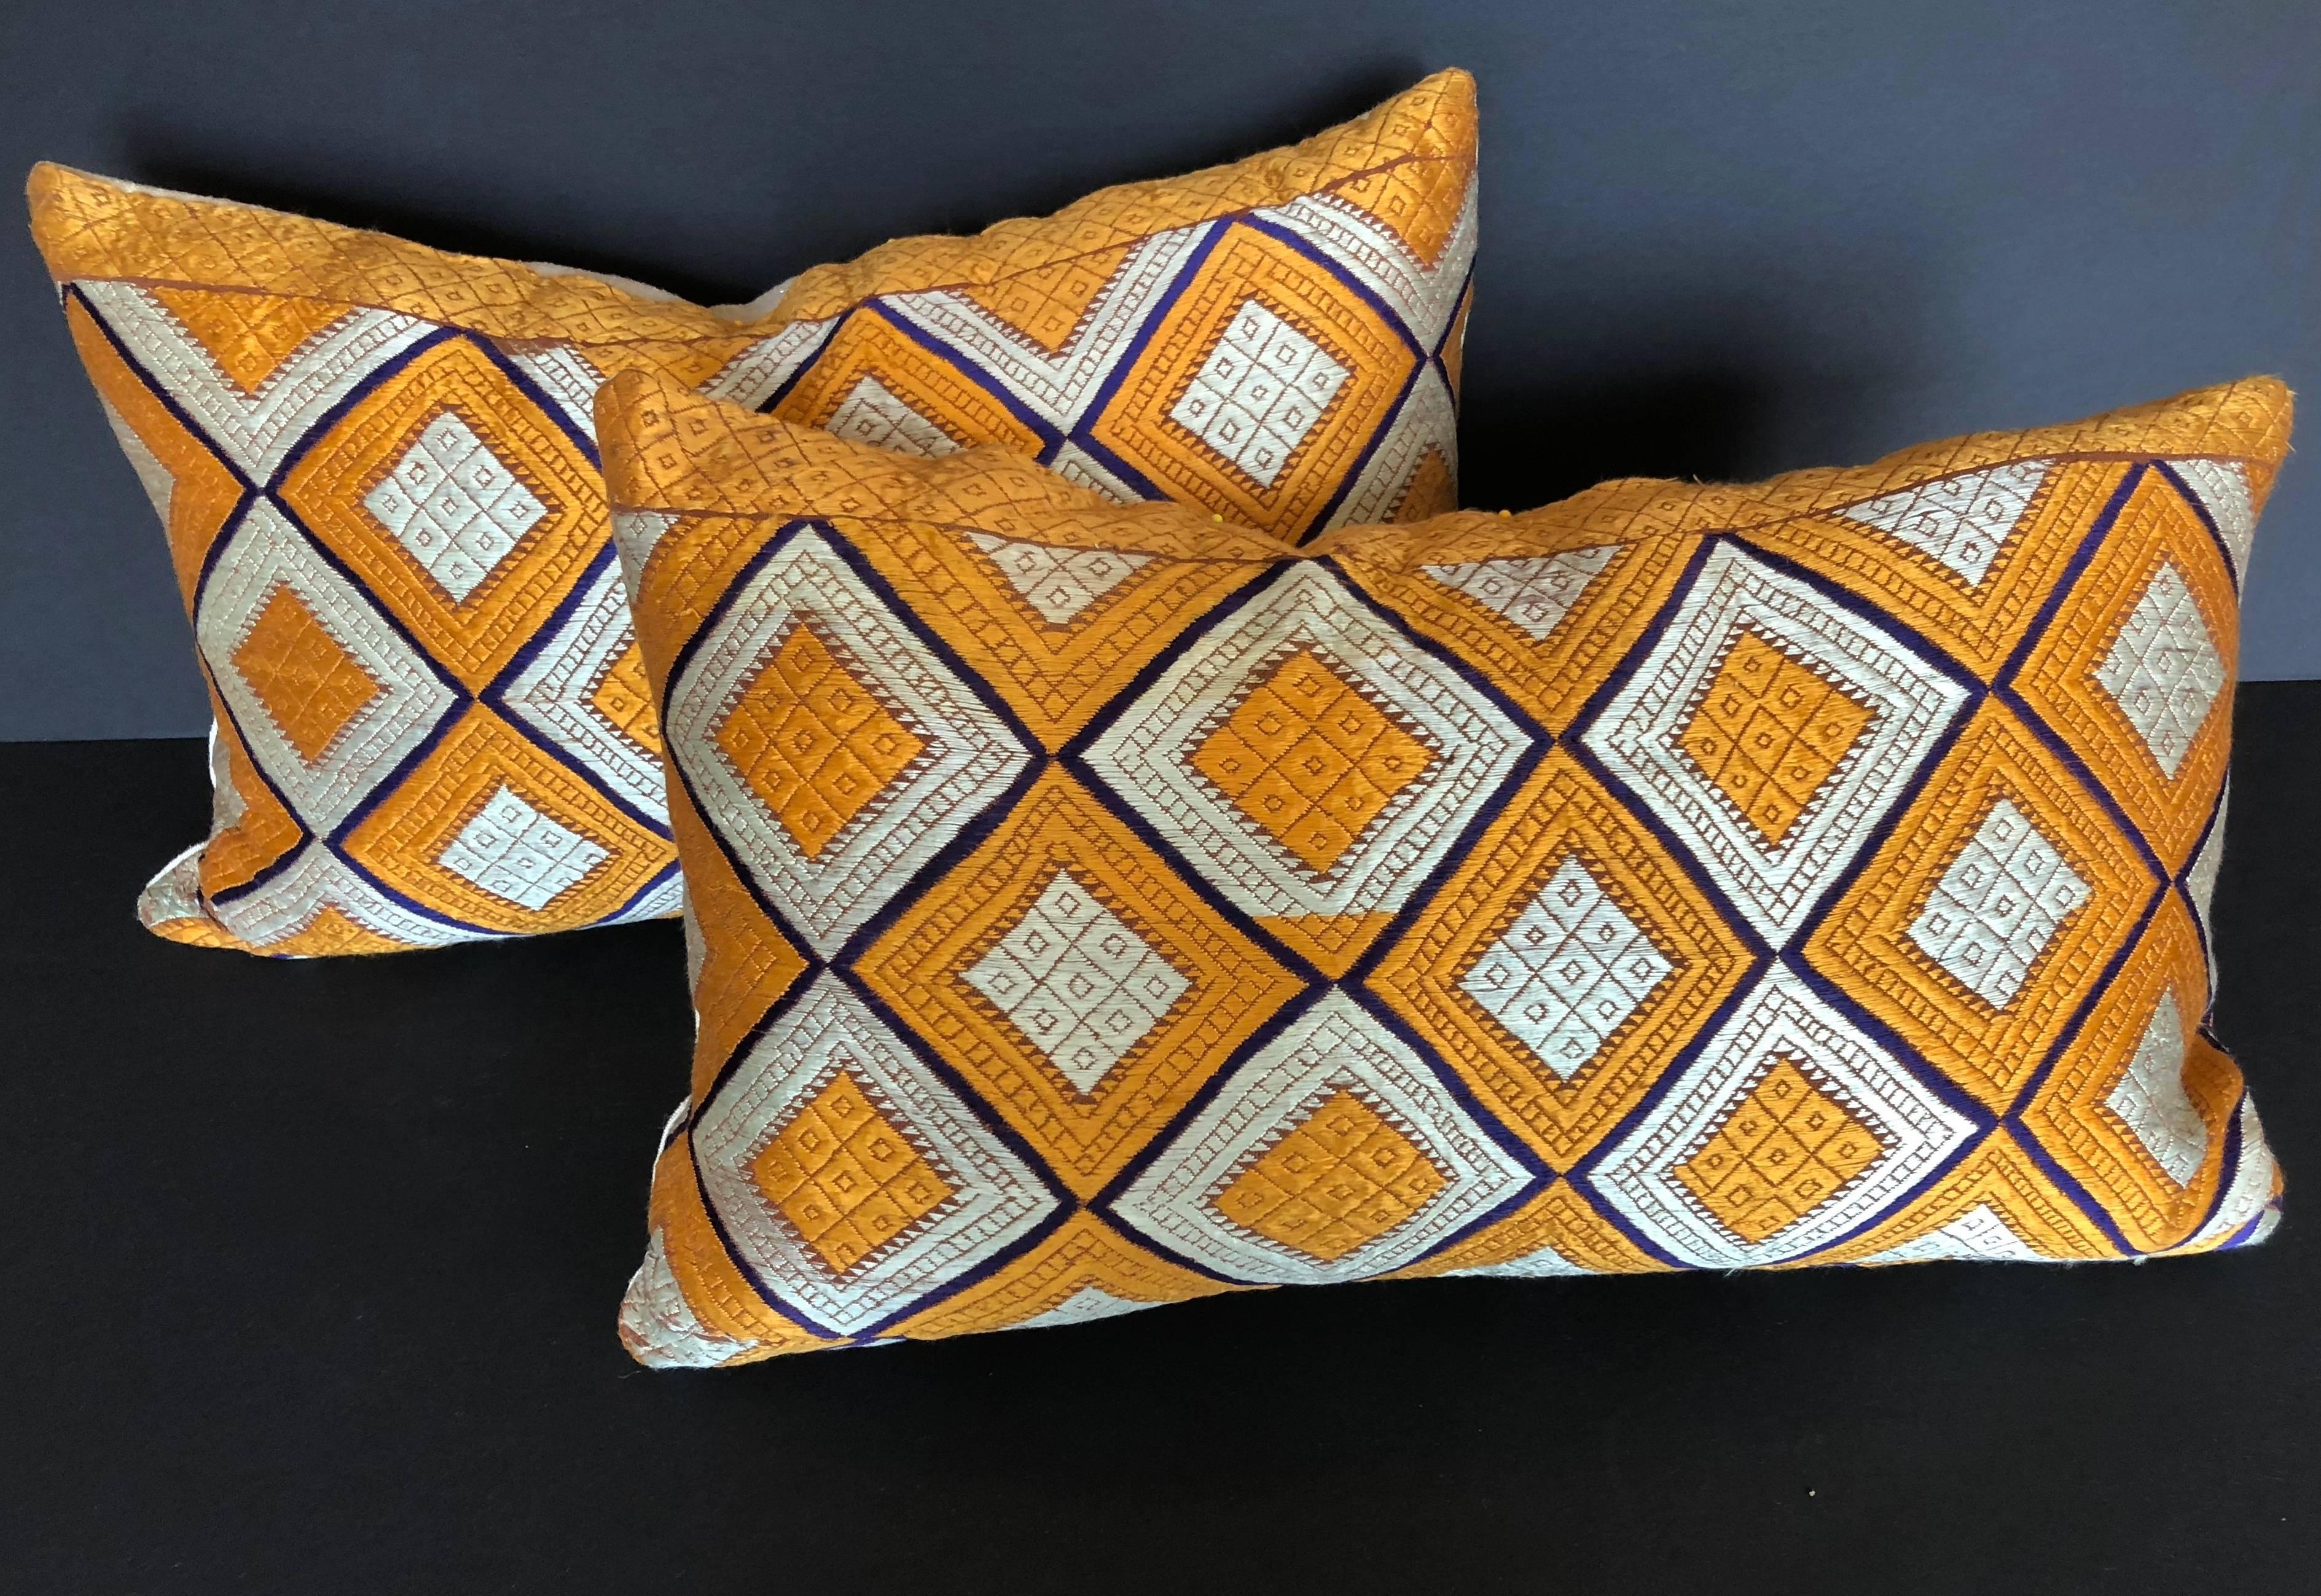 Custom pillows cut from a vintage silk Phulkari Bagh wedding shawl from Punjab, India. Hand-loomed cotton khadi cloth is hand embroidered with vibrant silk threads. The shawl is made by relatives of the young bride and worn at her wedding and other